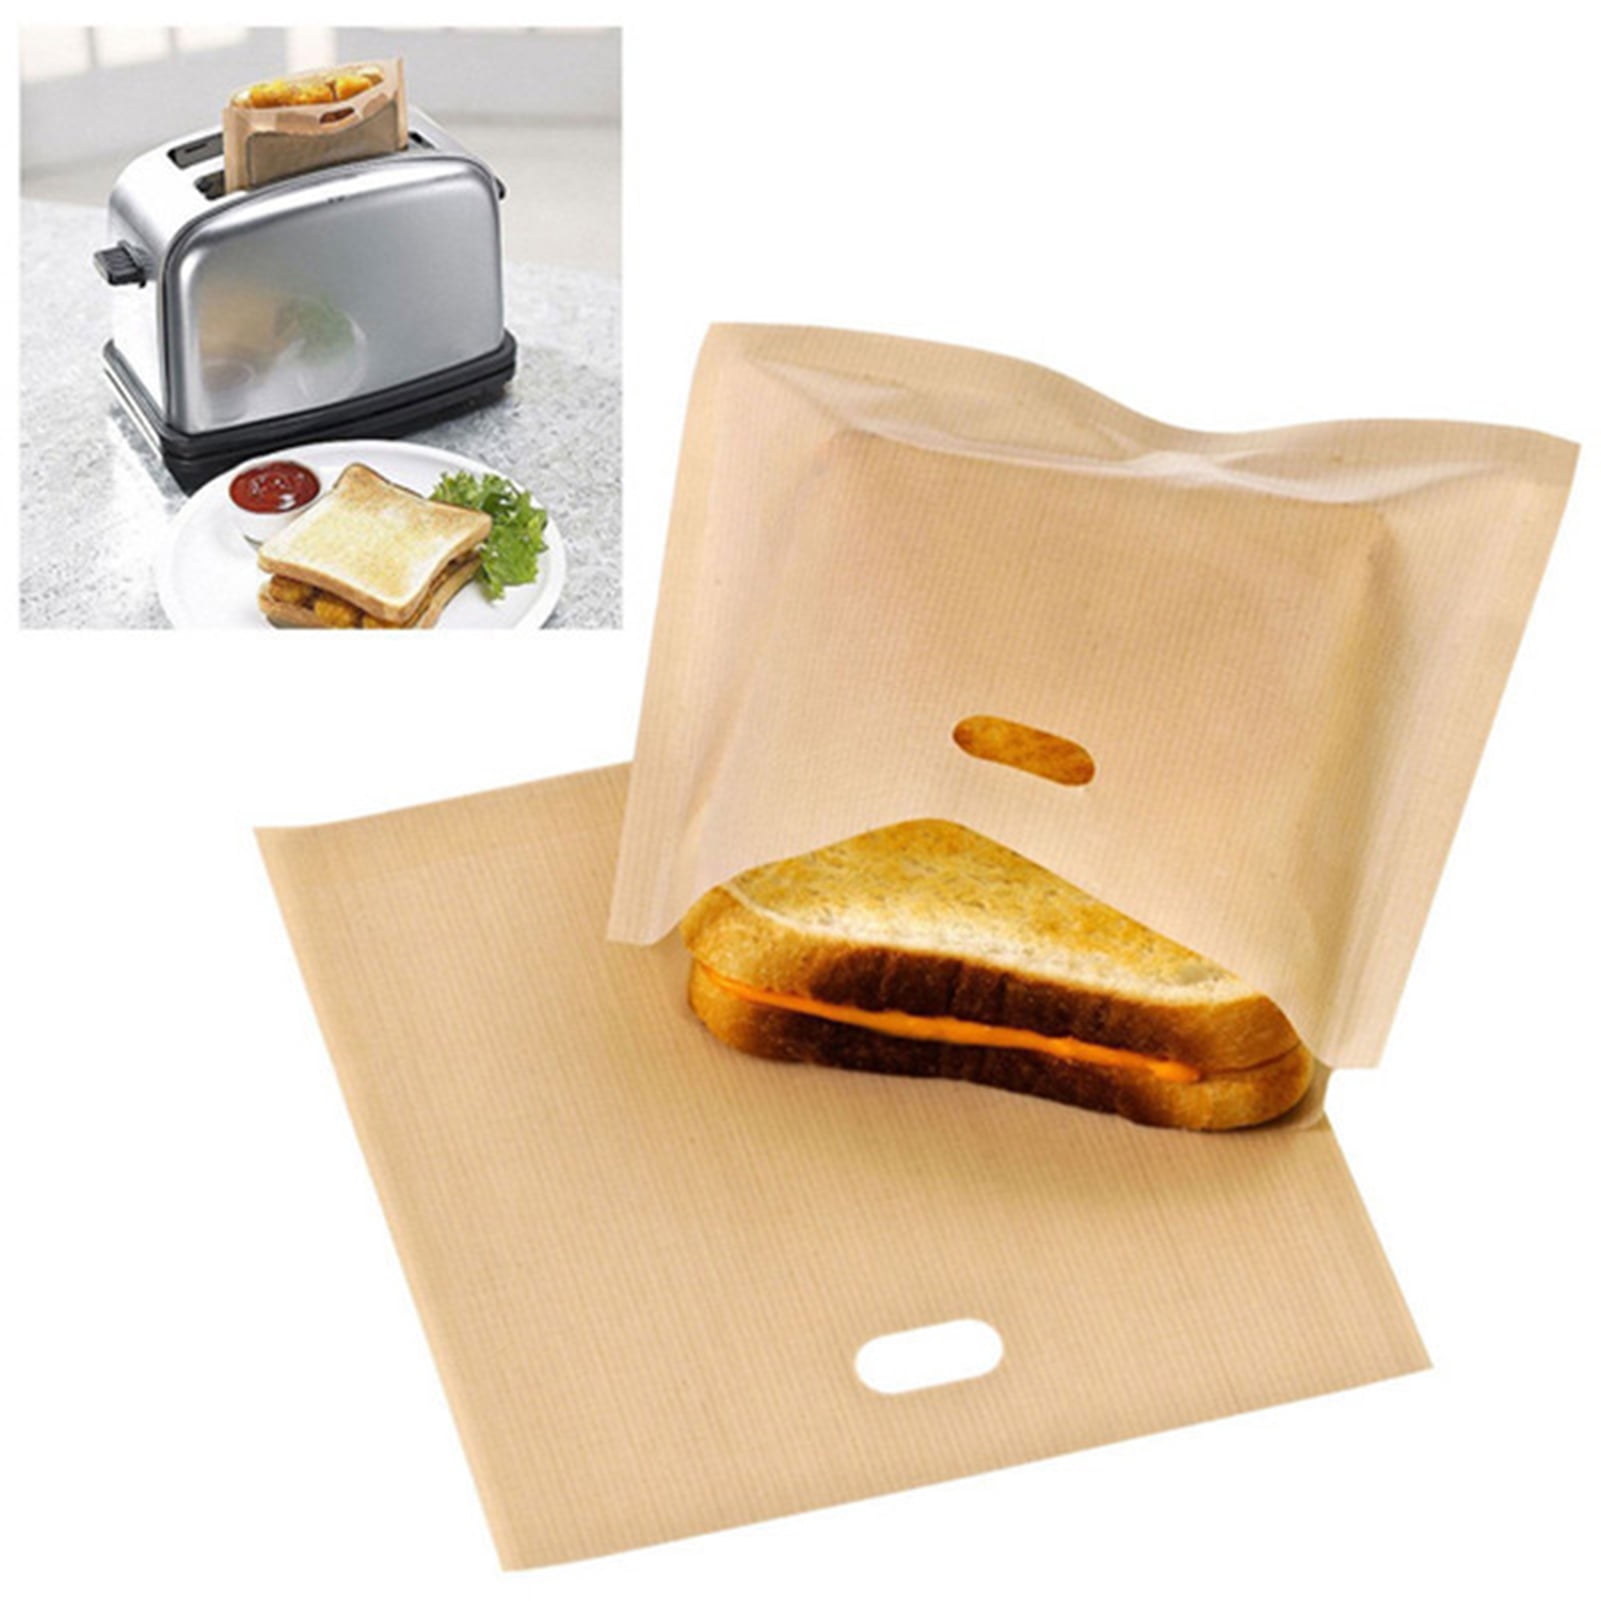 Travelwant Non Stick Toaster Bags Reusable and Heat Resistant Easy to Clean,Perfect for Grilled Sandwiches - Walmart.com